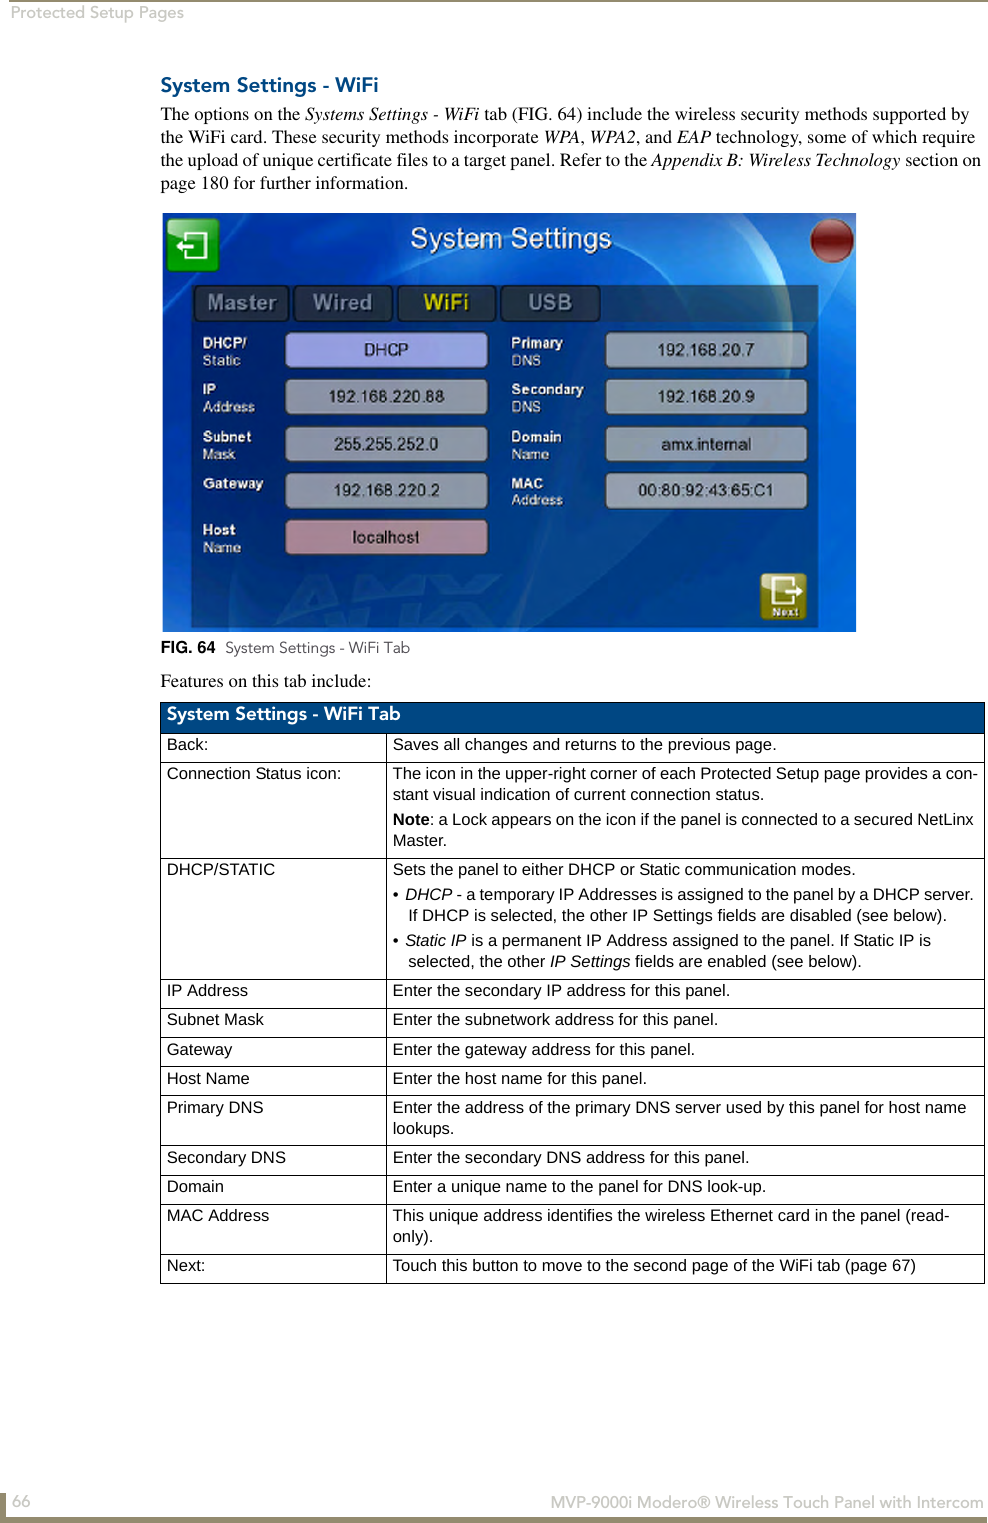 Protected Setup Pages66  MVP-9000i Modero® Wireless Touch Panel with IntercomSystem Settings - WiFiThe options on the Systems Settings - WiFi tab (FIG. 64) include the wireless security methods supported by the WiFi card. These security methods incorporate WPA, WPA2, and EAP technology, some of which require the upload of unique certificate files to a target panel. Refer to the Appendix B: Wireless Technology section on page 180 for further information.Features on this tab include:FIG. 64  System Settings - WiFi TabSystem Settings - WiFi TabBack: Saves all changes and returns to the previous page.Connection Status icon: The icon in the upper-right corner of each Protected Setup page provides a con-stant visual indication of current connection status.Note: a Lock appears on the icon if the panel is connected to a secured NetLinx Master.DHCP/STATIC Sets the panel to either DHCP or Static communication modes. •DHCP - a temporary IP Addresses is assigned to the panel by a DHCP server. If DHCP is selected, the other IP Settings fields are disabled (see below).•Static IP is a permanent IP Address assigned to the panel. If Static IP is selected, the other IP Settings fields are enabled (see below).IP Address Enter the secondary IP address for this panel.Subnet Mask Enter the subnetwork address for this panel.Gateway Enter the gateway address for this panel.Host Name Enter the host name for this panel.Primary DNS Enter the address of the primary DNS server used by this panel for host name lookups.Secondary DNS Enter the secondary DNS address for this panel.Domain Enter a unique name to the panel for DNS look-up.MAC Address This unique address identifies the wireless Ethernet card in the panel (read-only). Next: Touch this button to move to the second page of the WiFi tab (page 67)